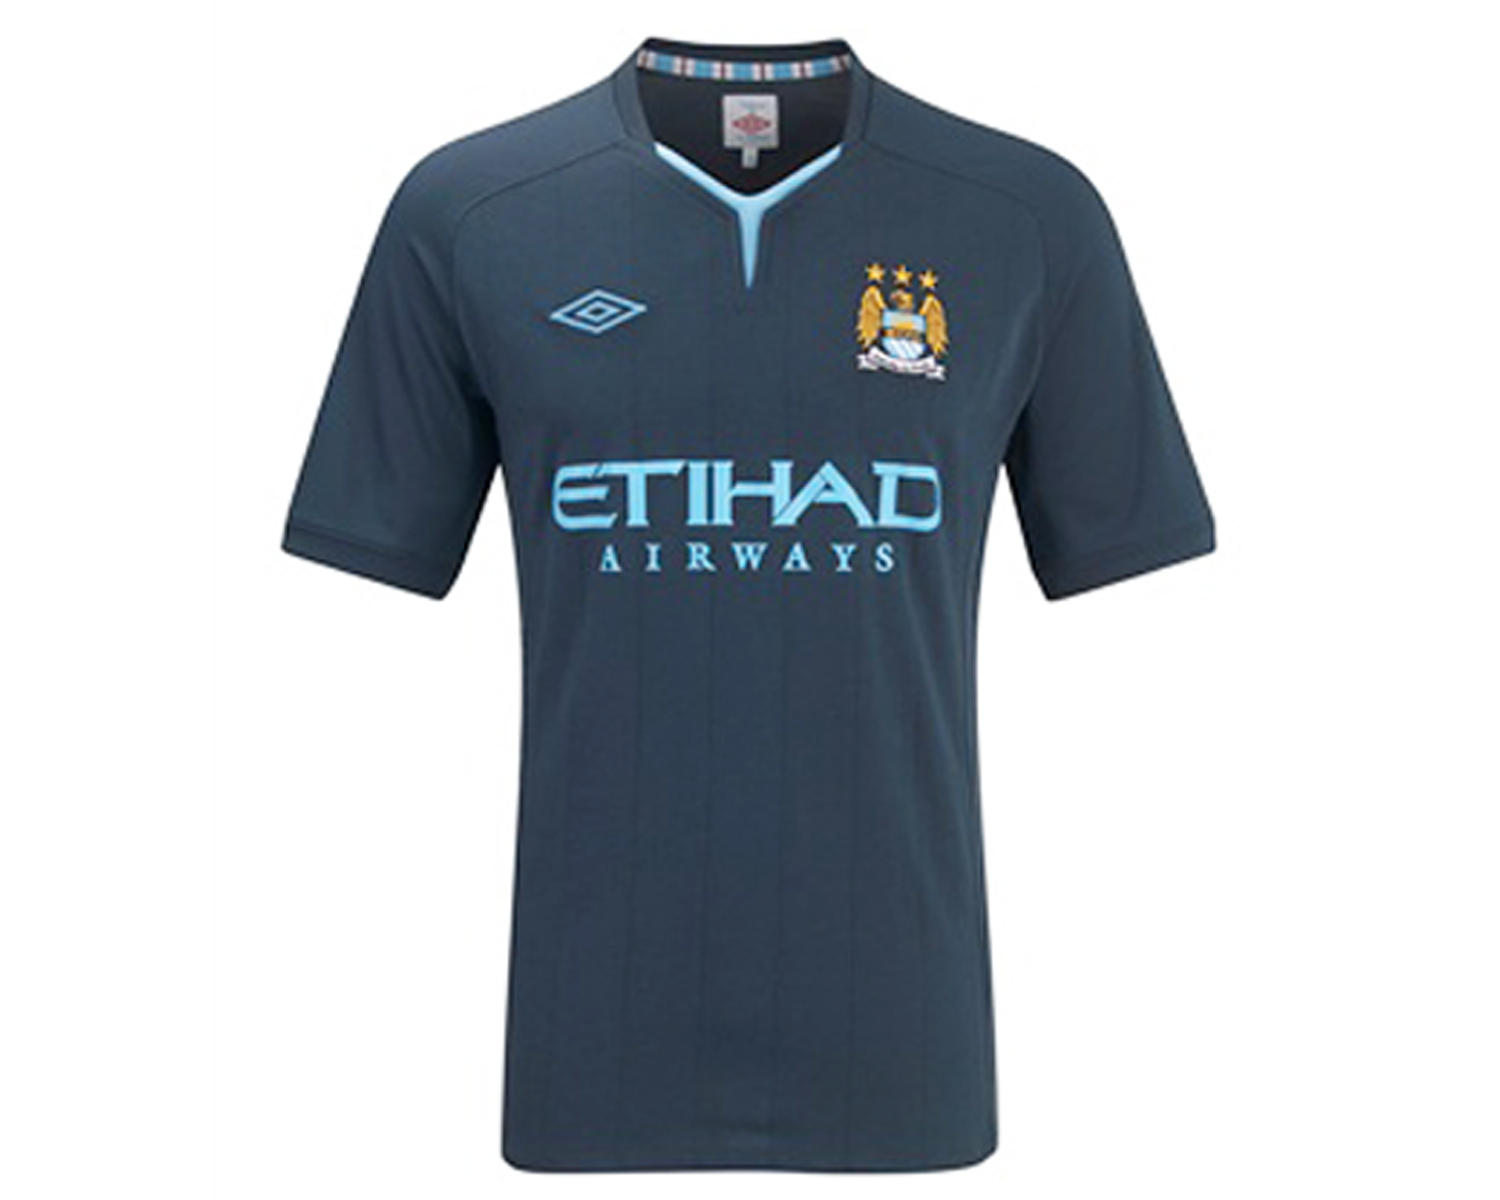 jersey: MAN.CITY AWAY JERSEY , SIZE M, XL, PRICE RM45 INCLUSIVED SHIPPING